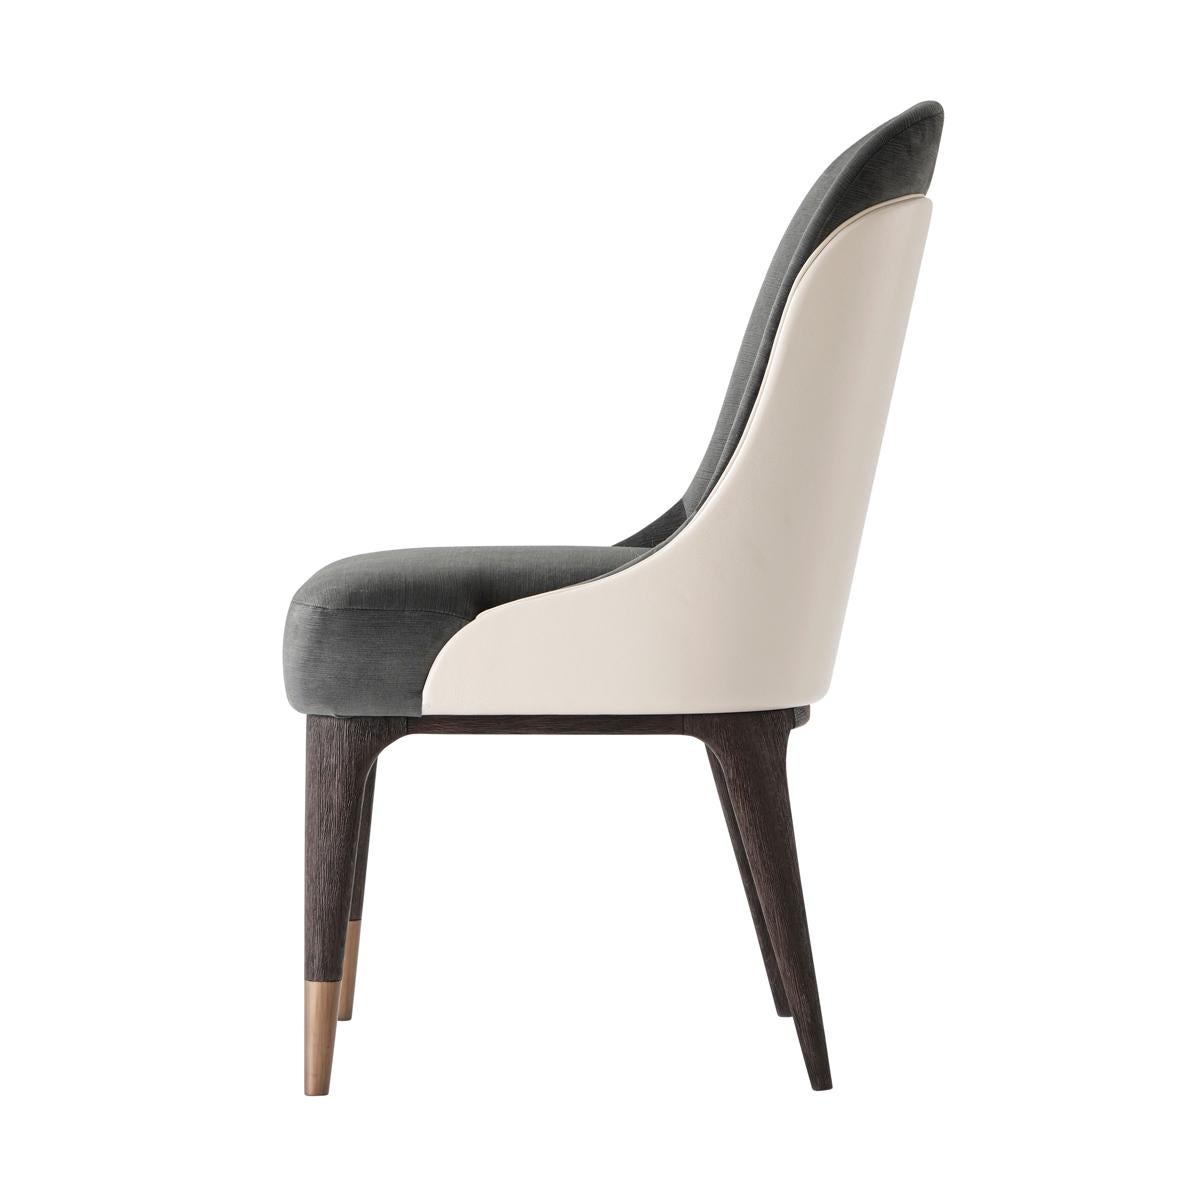 Vietnamese Covet Modern Dining Chairs For Sale